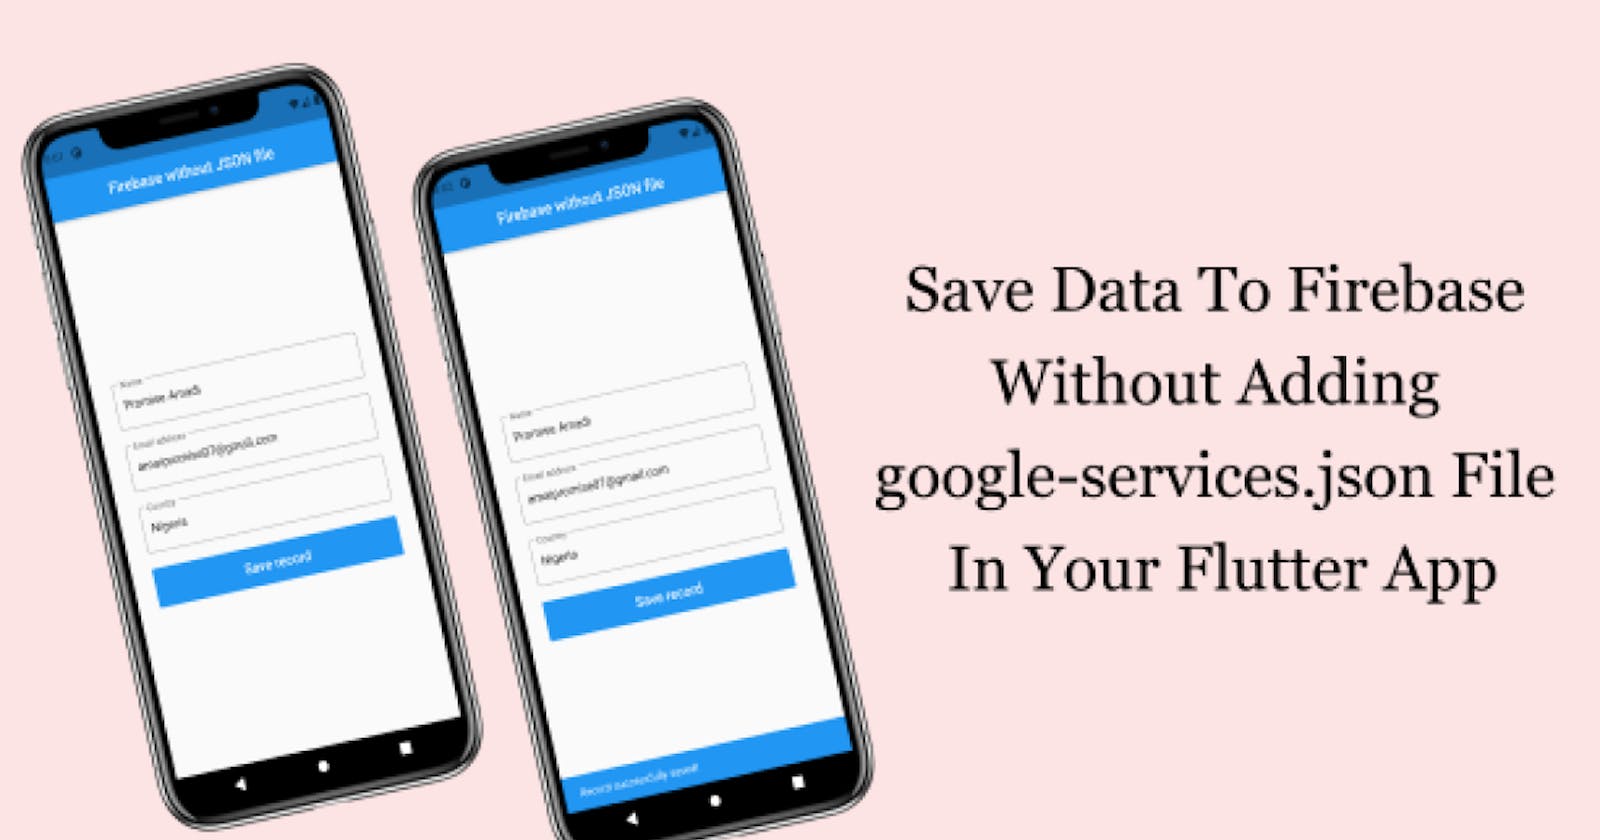 Easiest Steps On How To Save Data To Firebase Without Adding google-services.json File In Your Flutter App